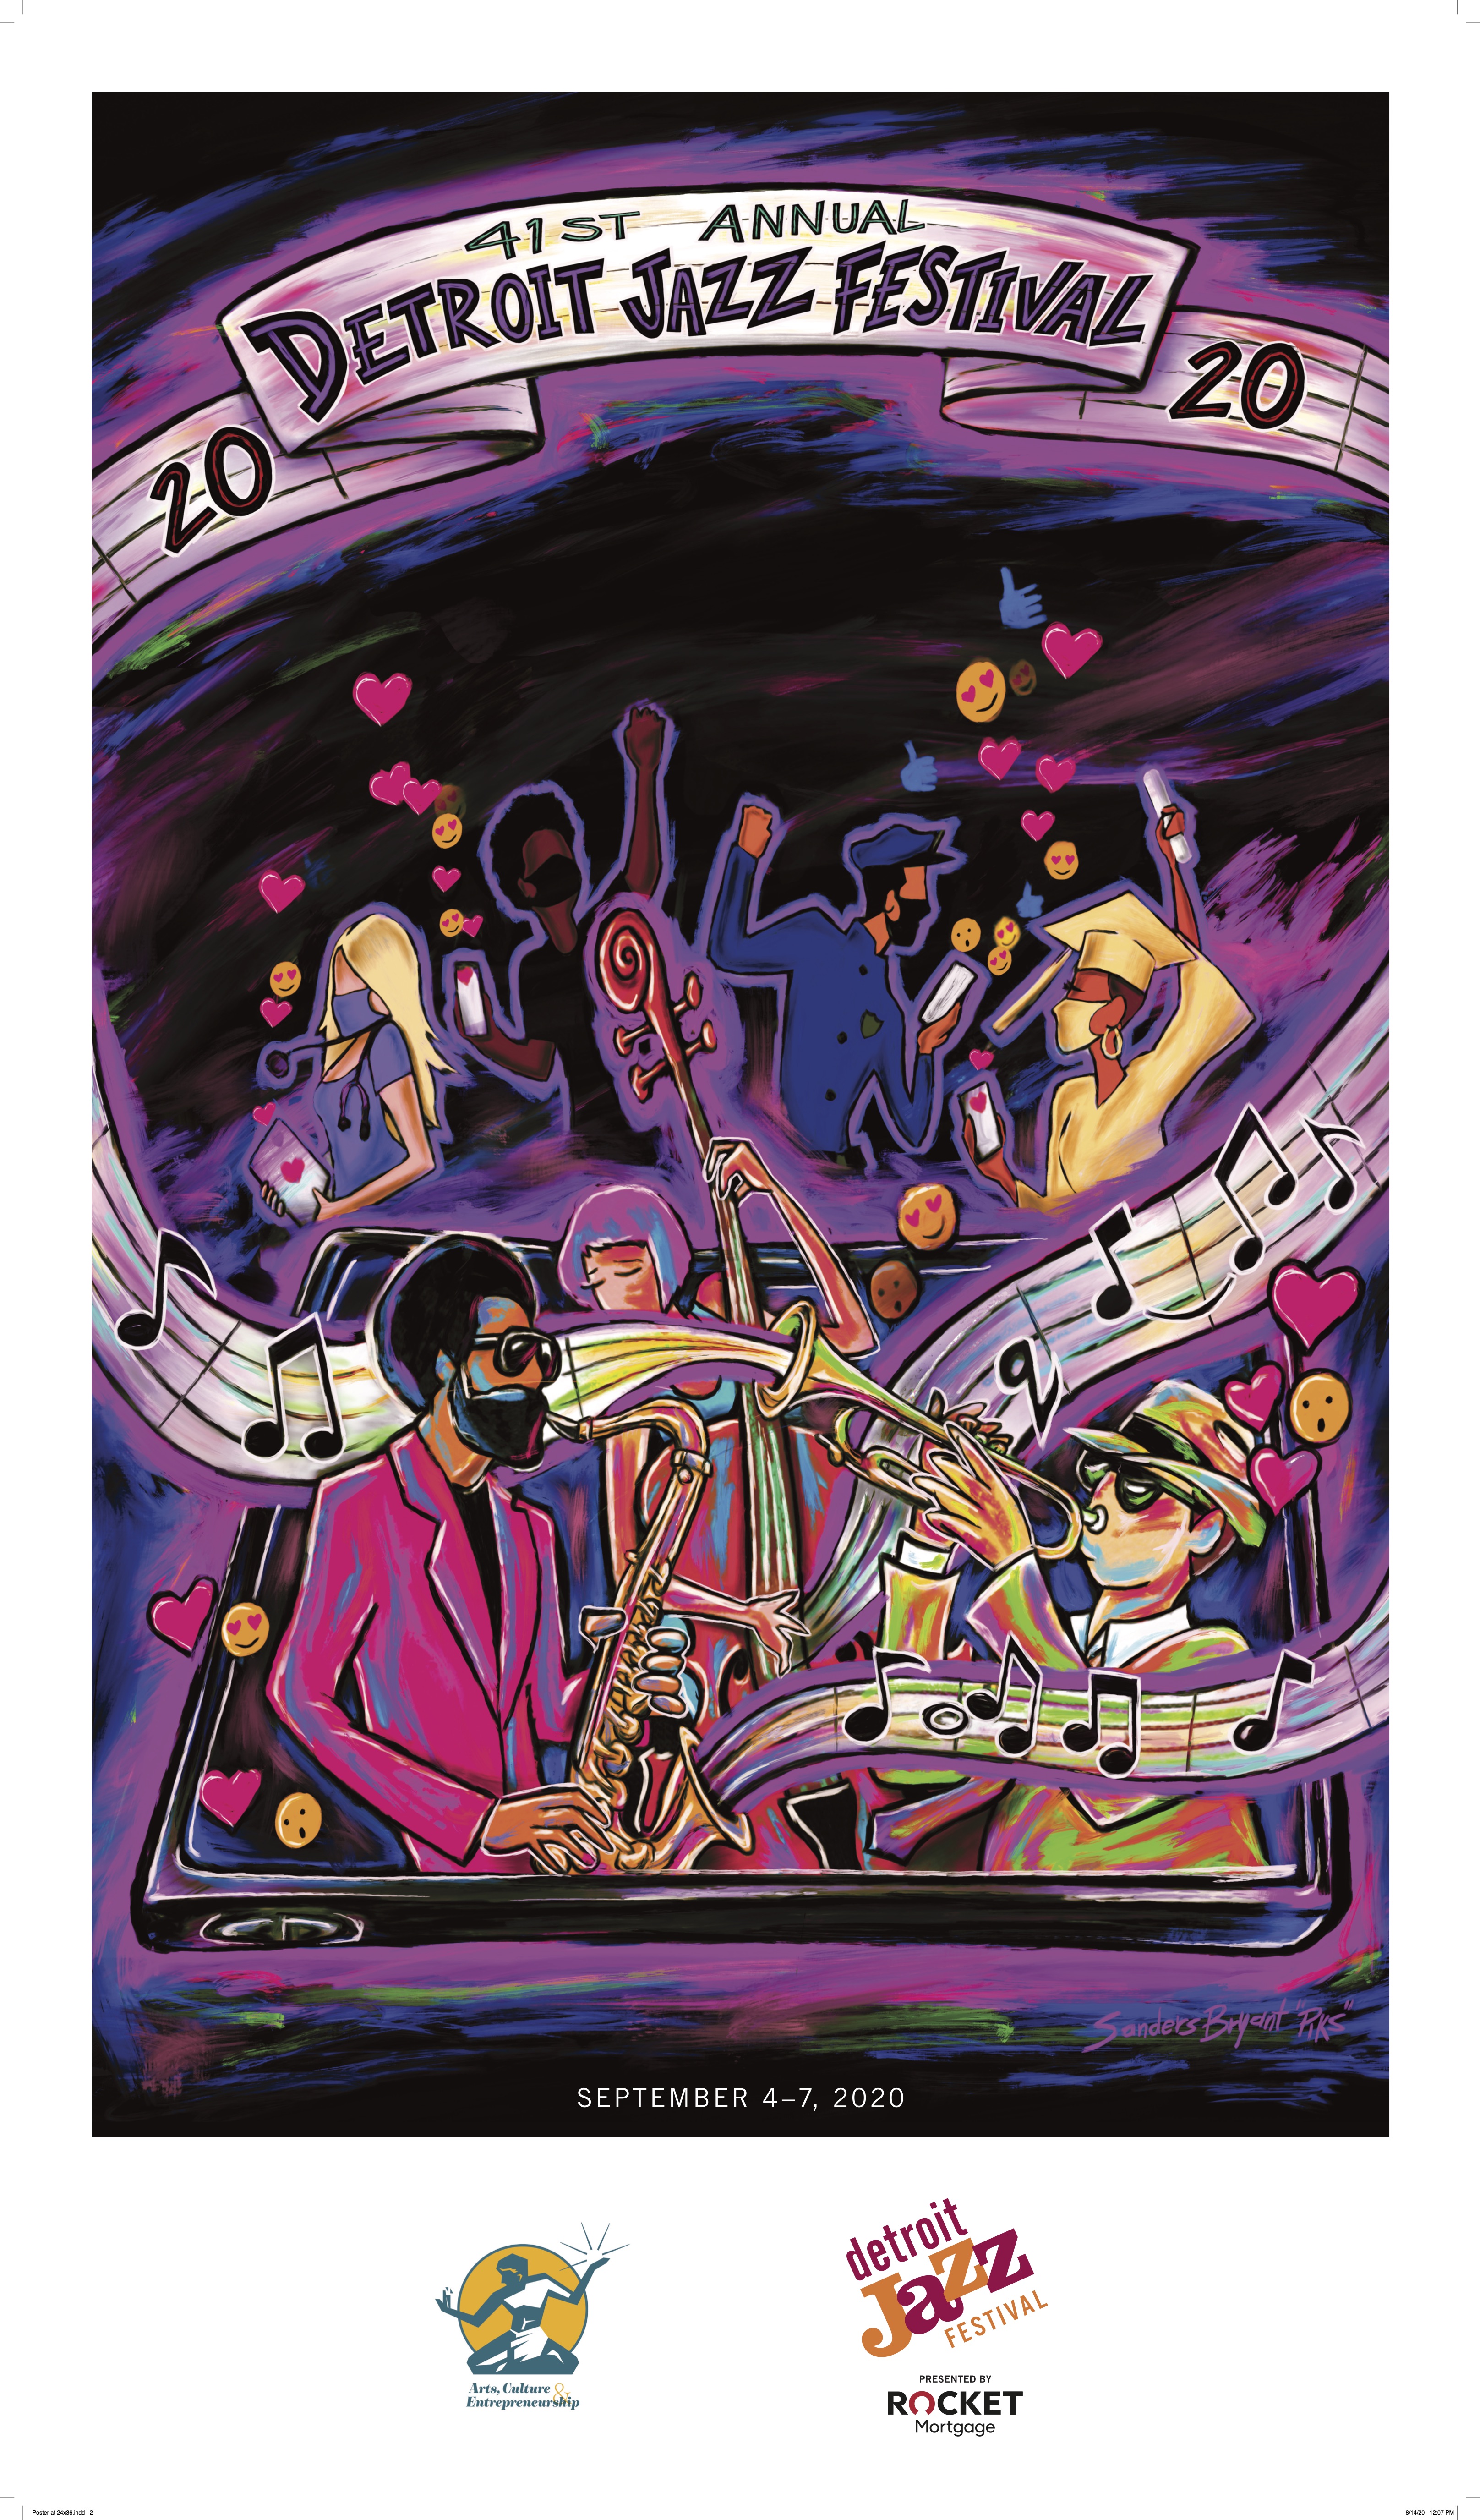 Official 41st Annual Detroit Jazz Festival Posters are Available at The